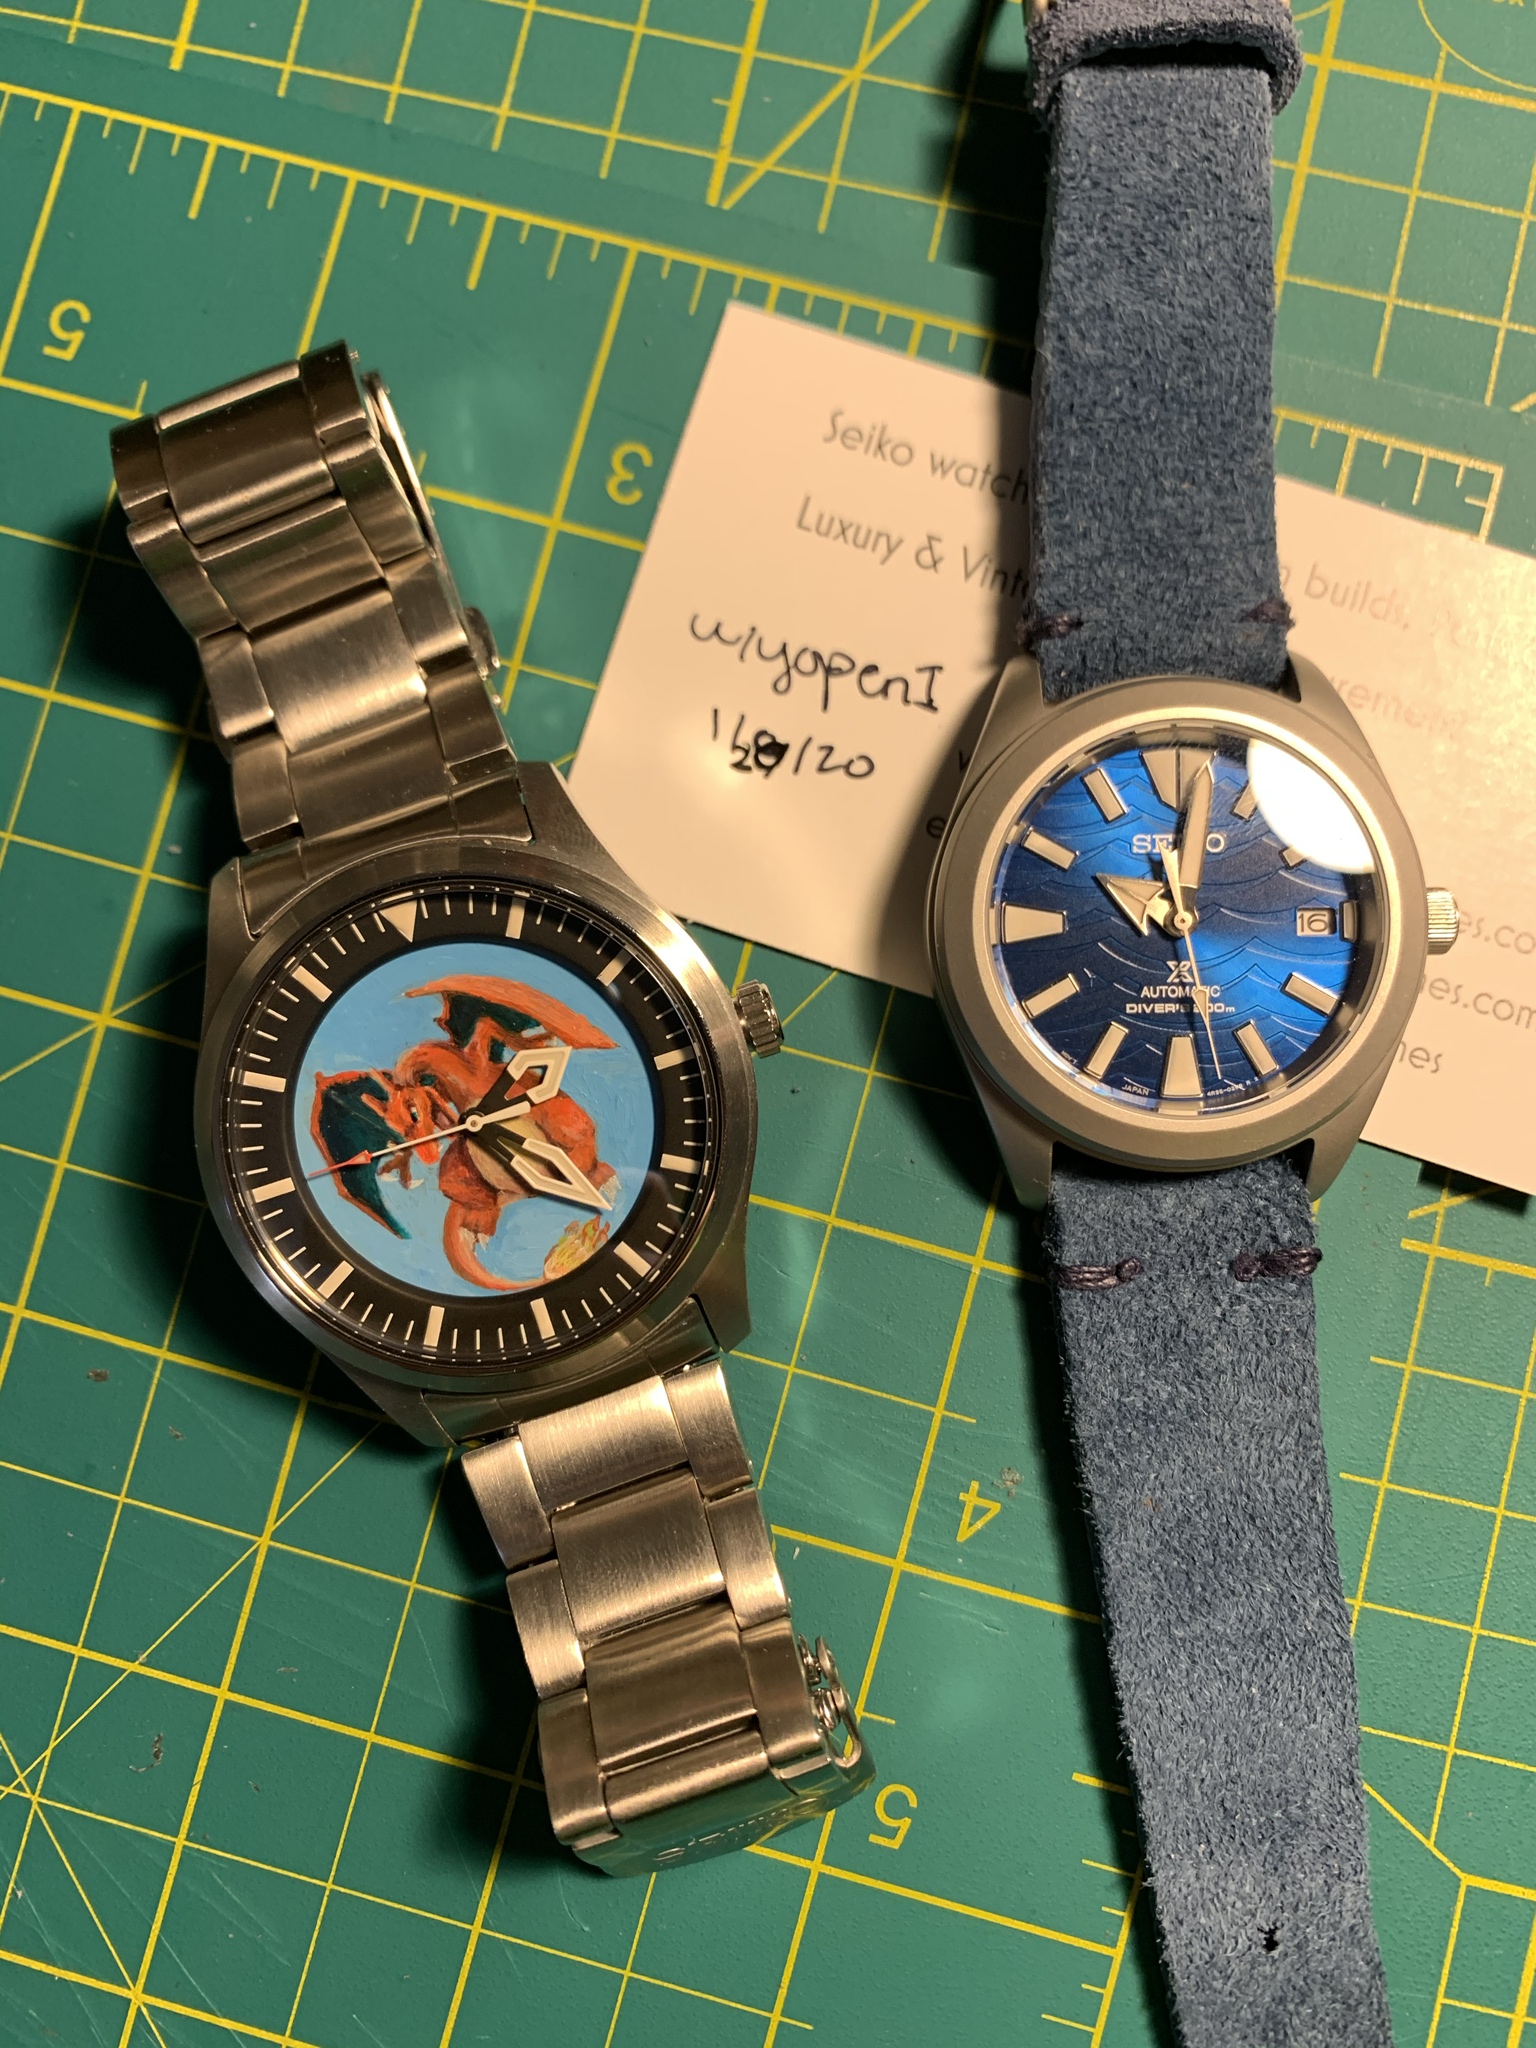 WTS] Seiko SNZG13 Charizard Mod - Maxed Out! | WatchCharts